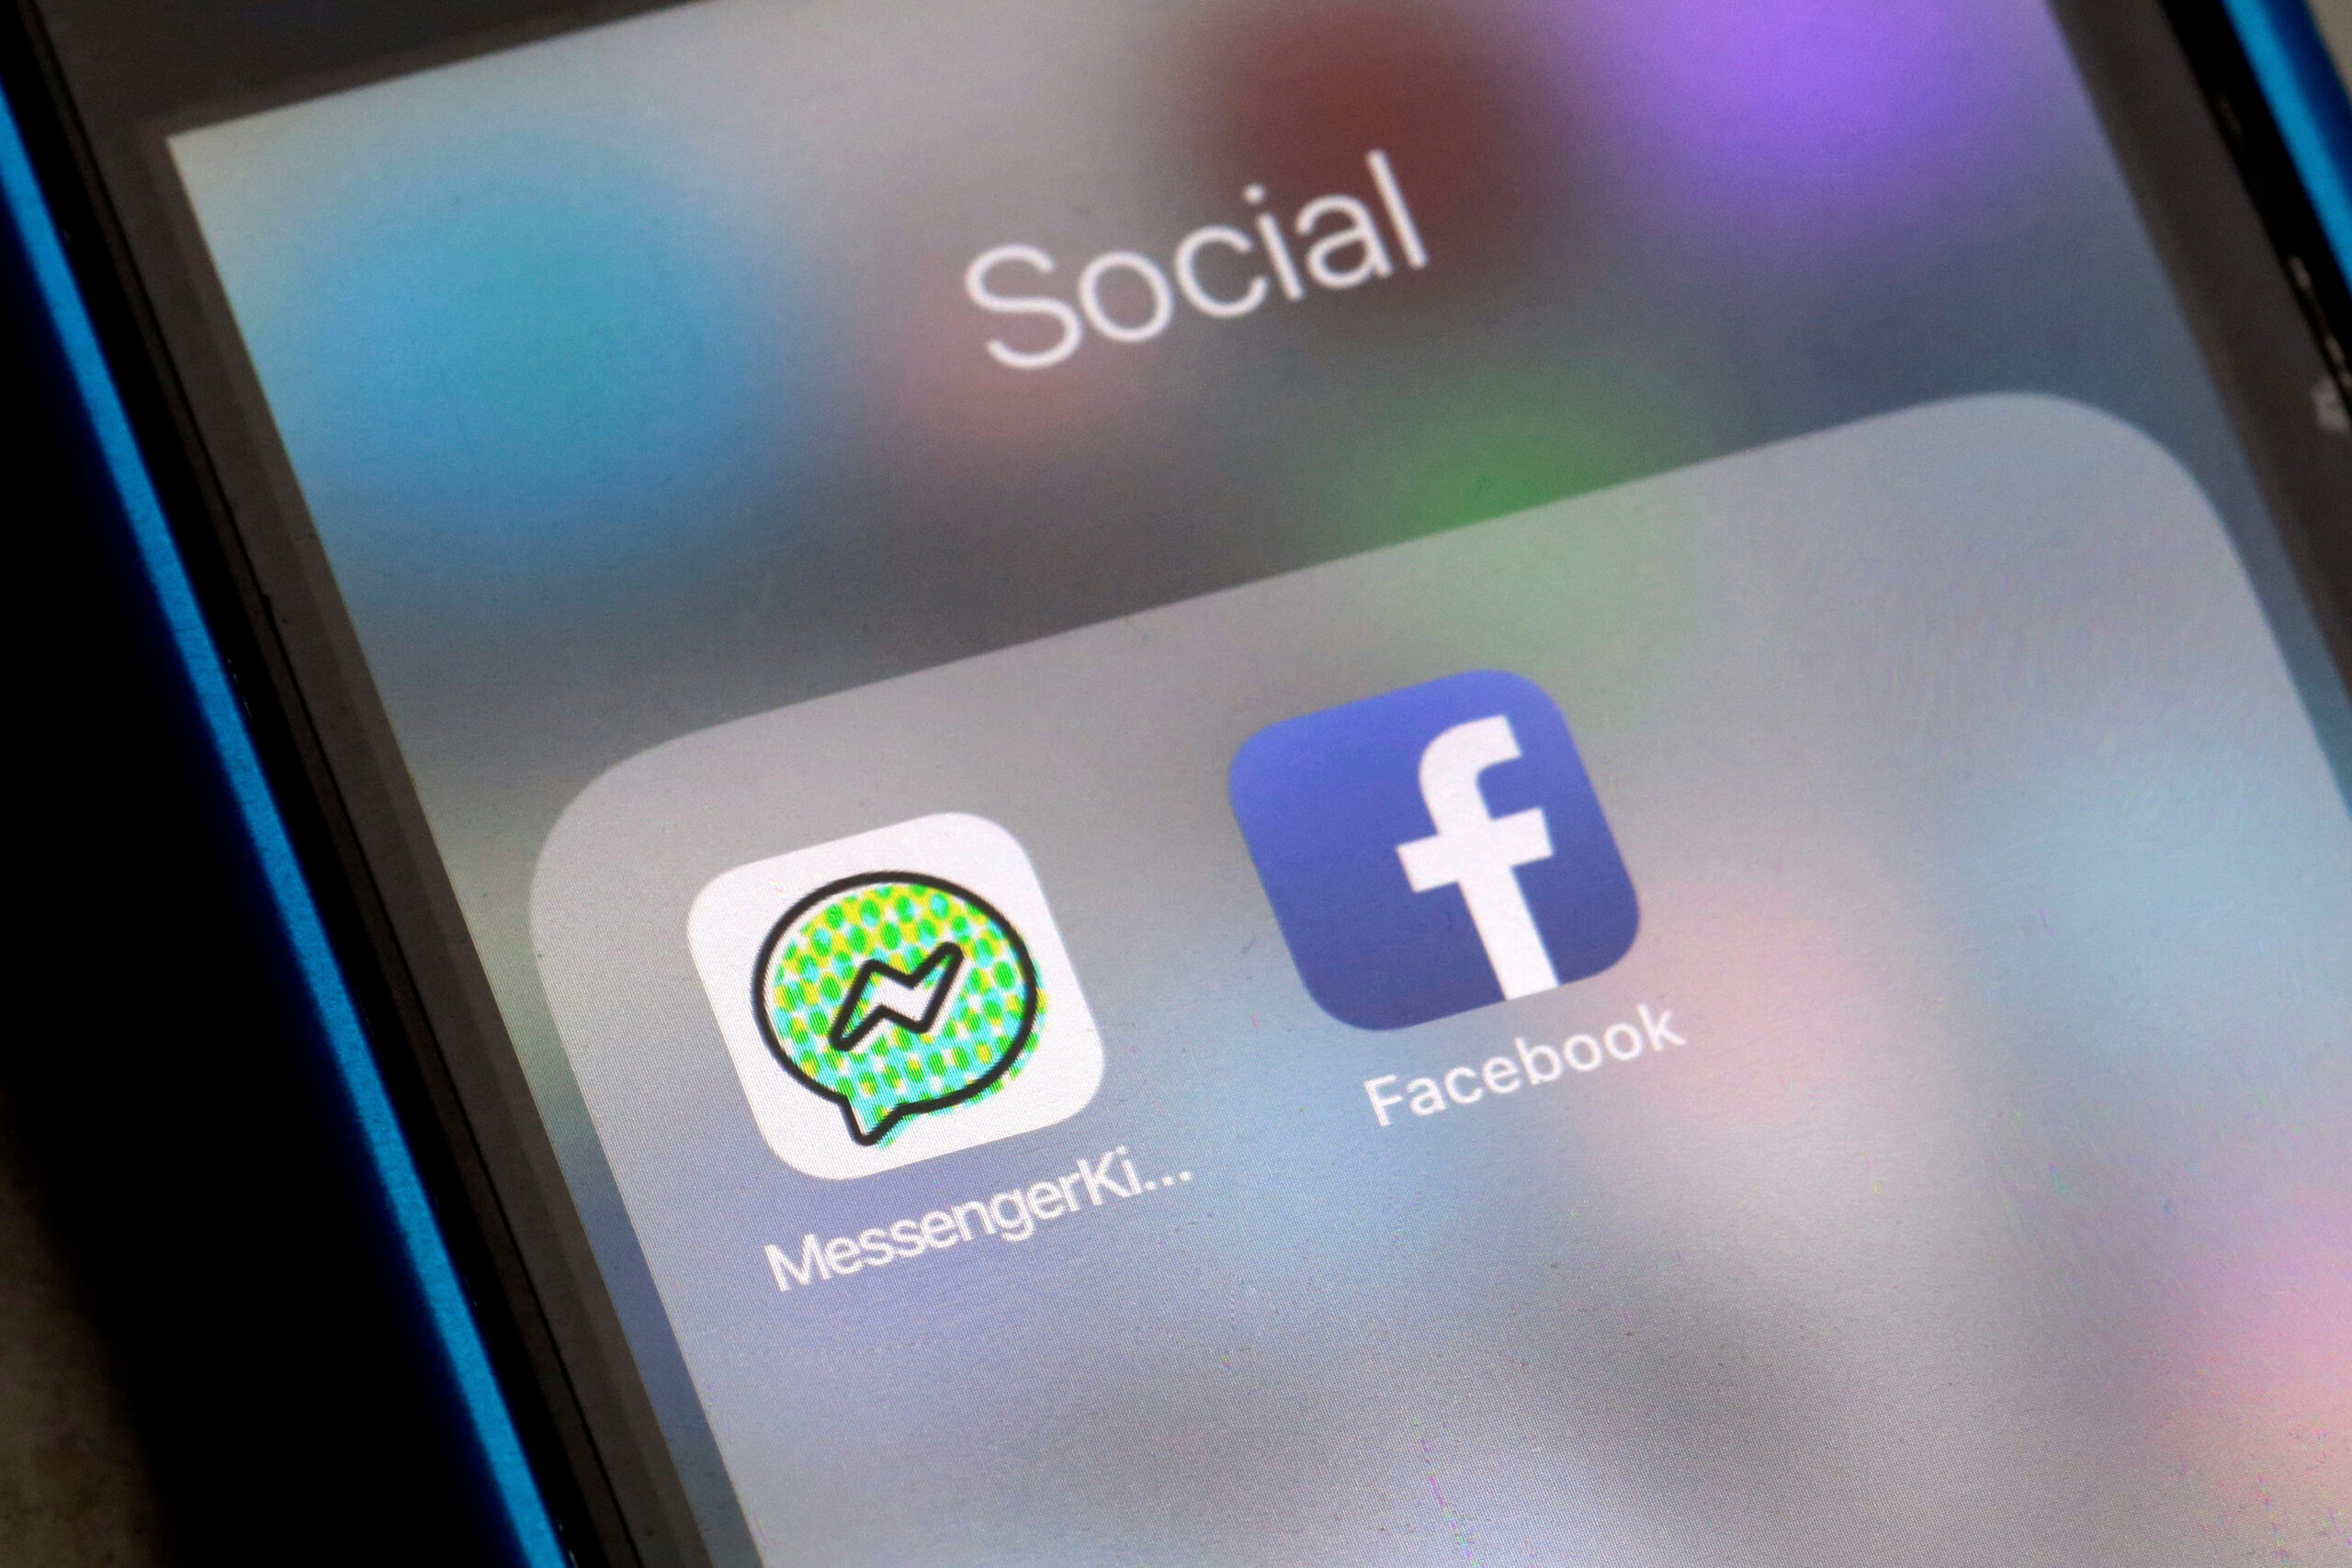 Facebook's Messenger Kids app is displayed on an iPhone